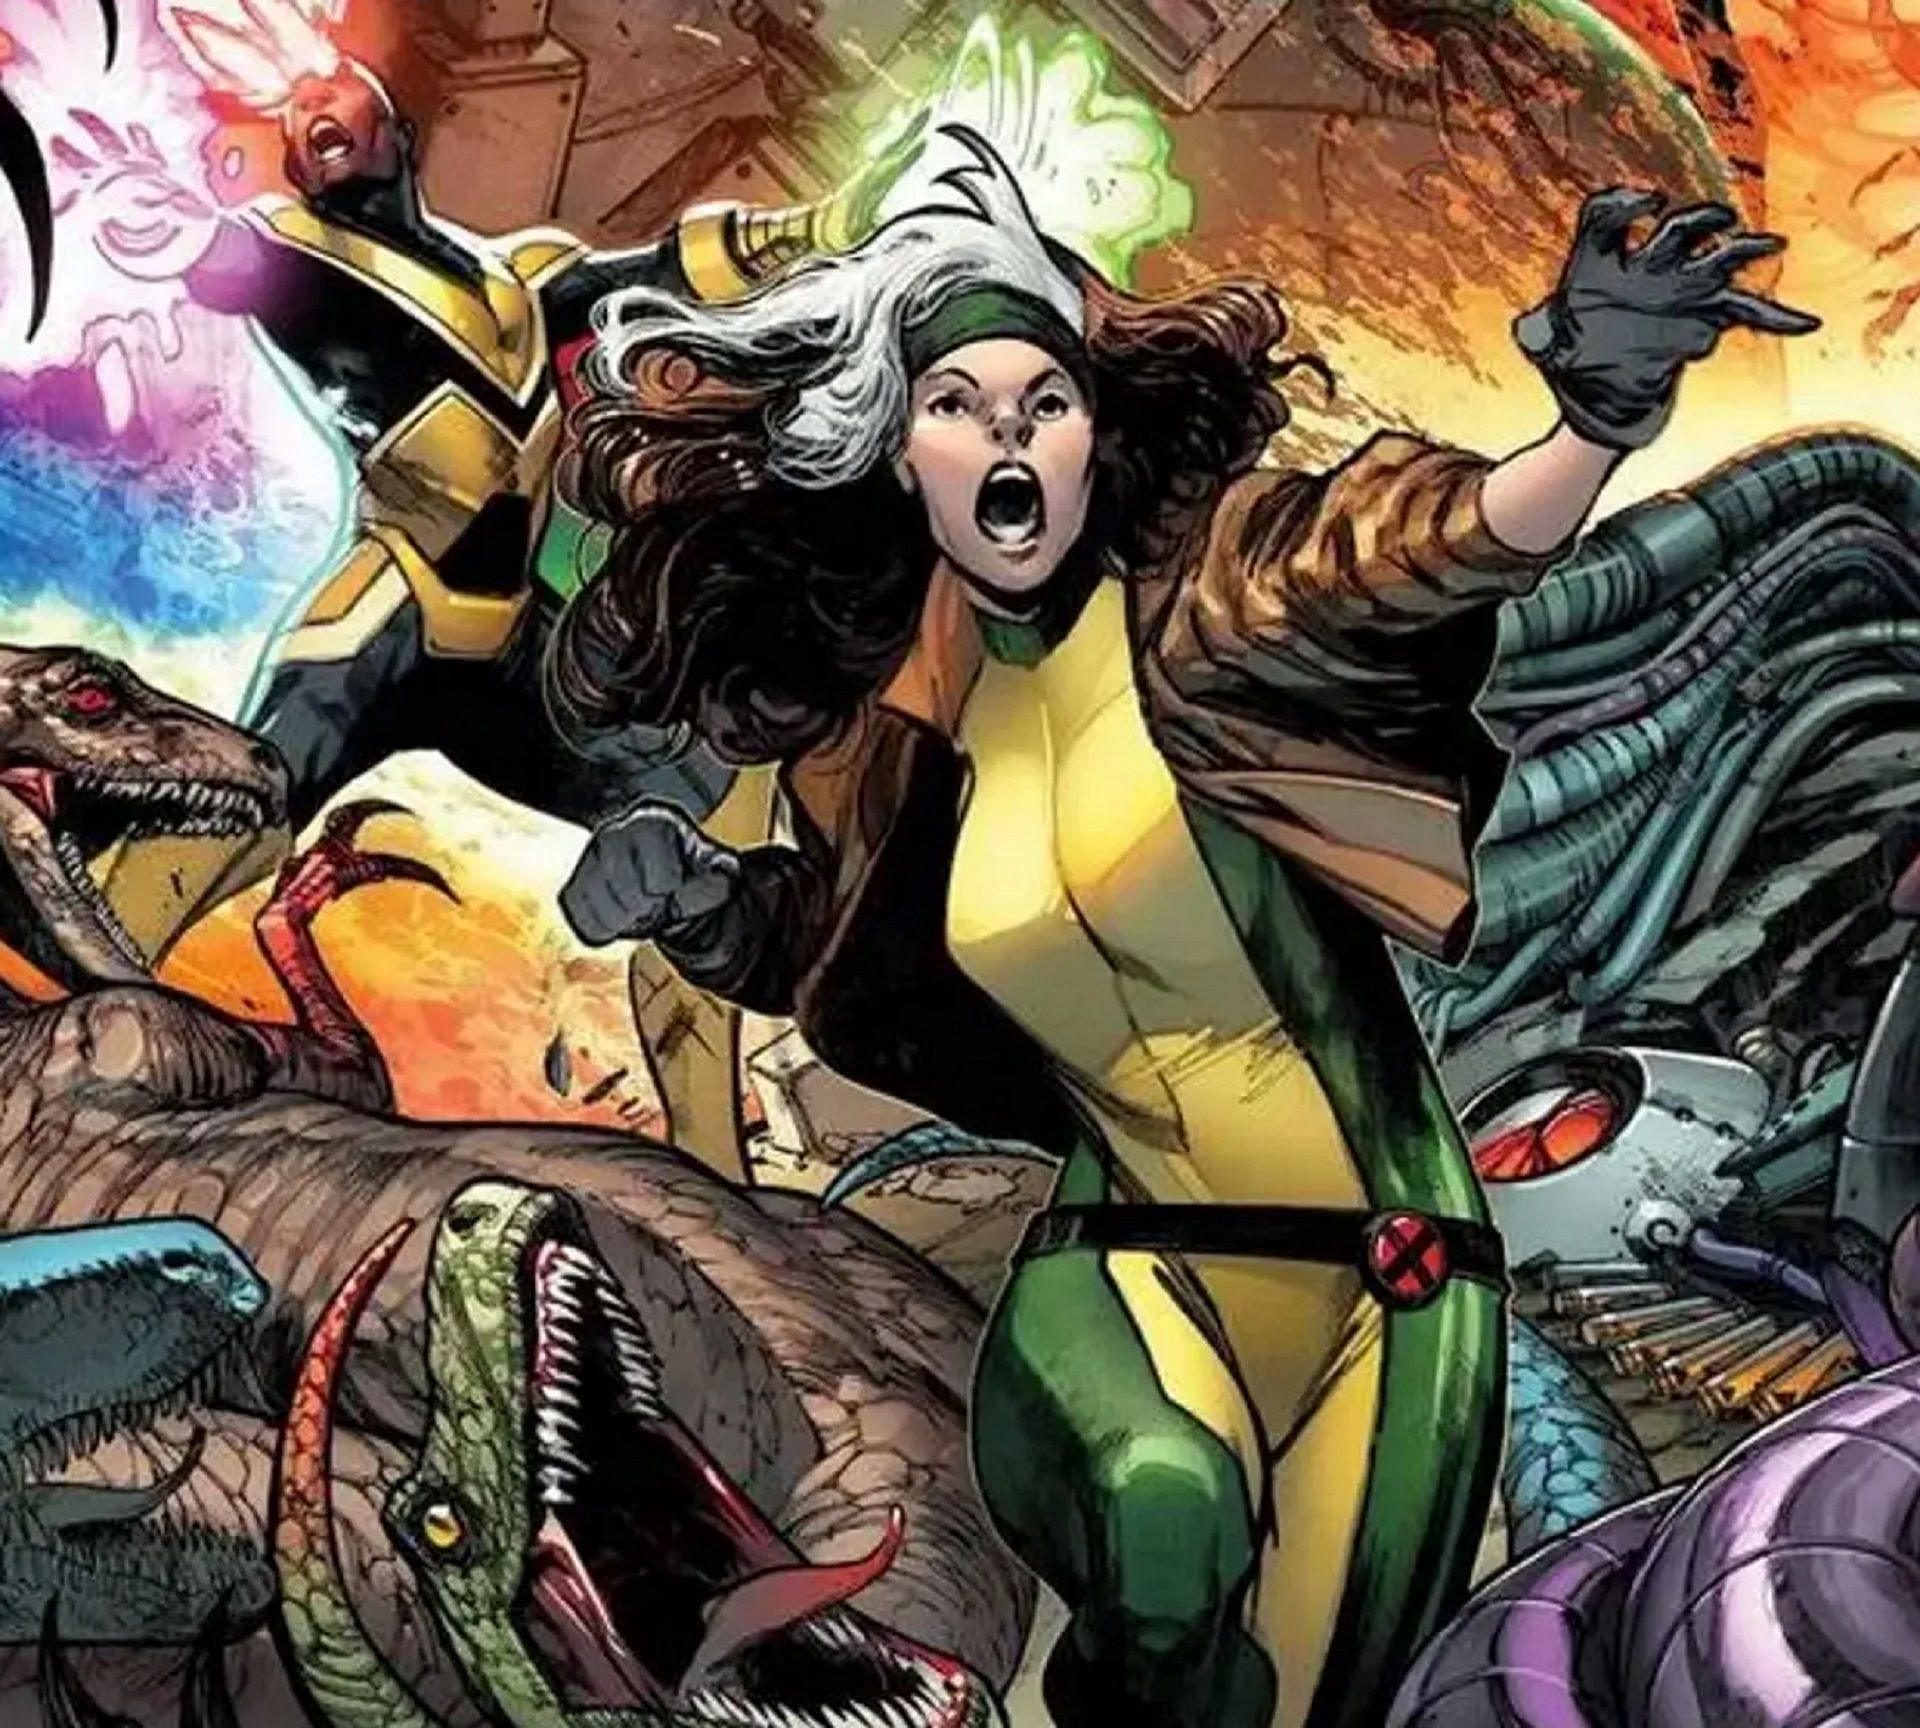 Rogue always found it challenging to work with Wanda (Image via Marvel)